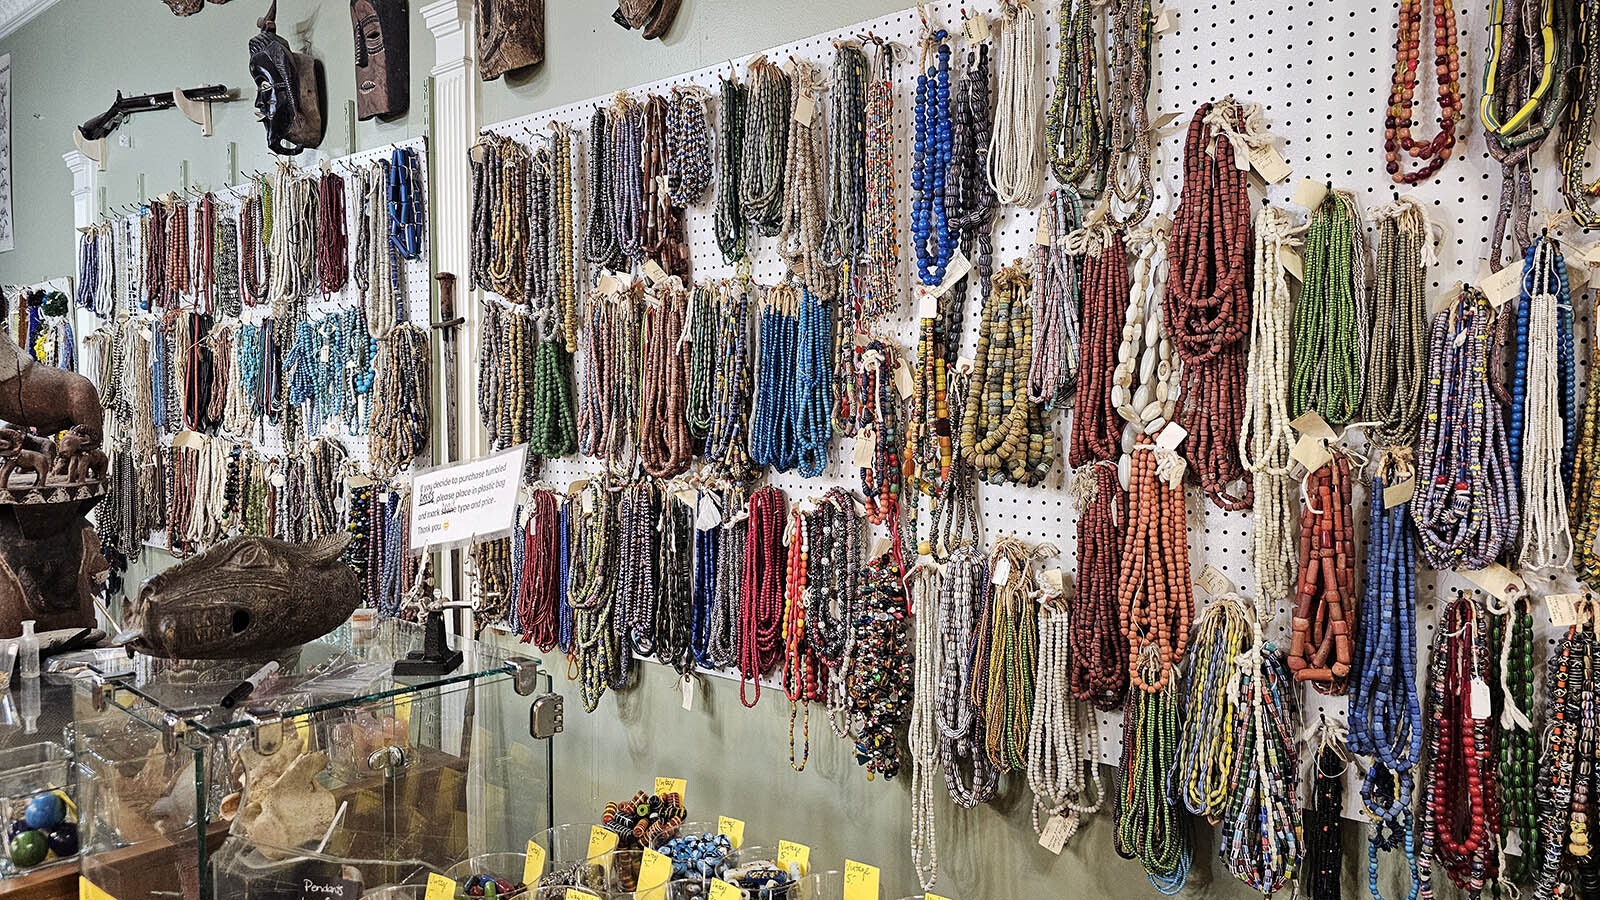 All kinds of trade beads, some of them 200 years old, at Bohemian Metals shop in Cheyenne.